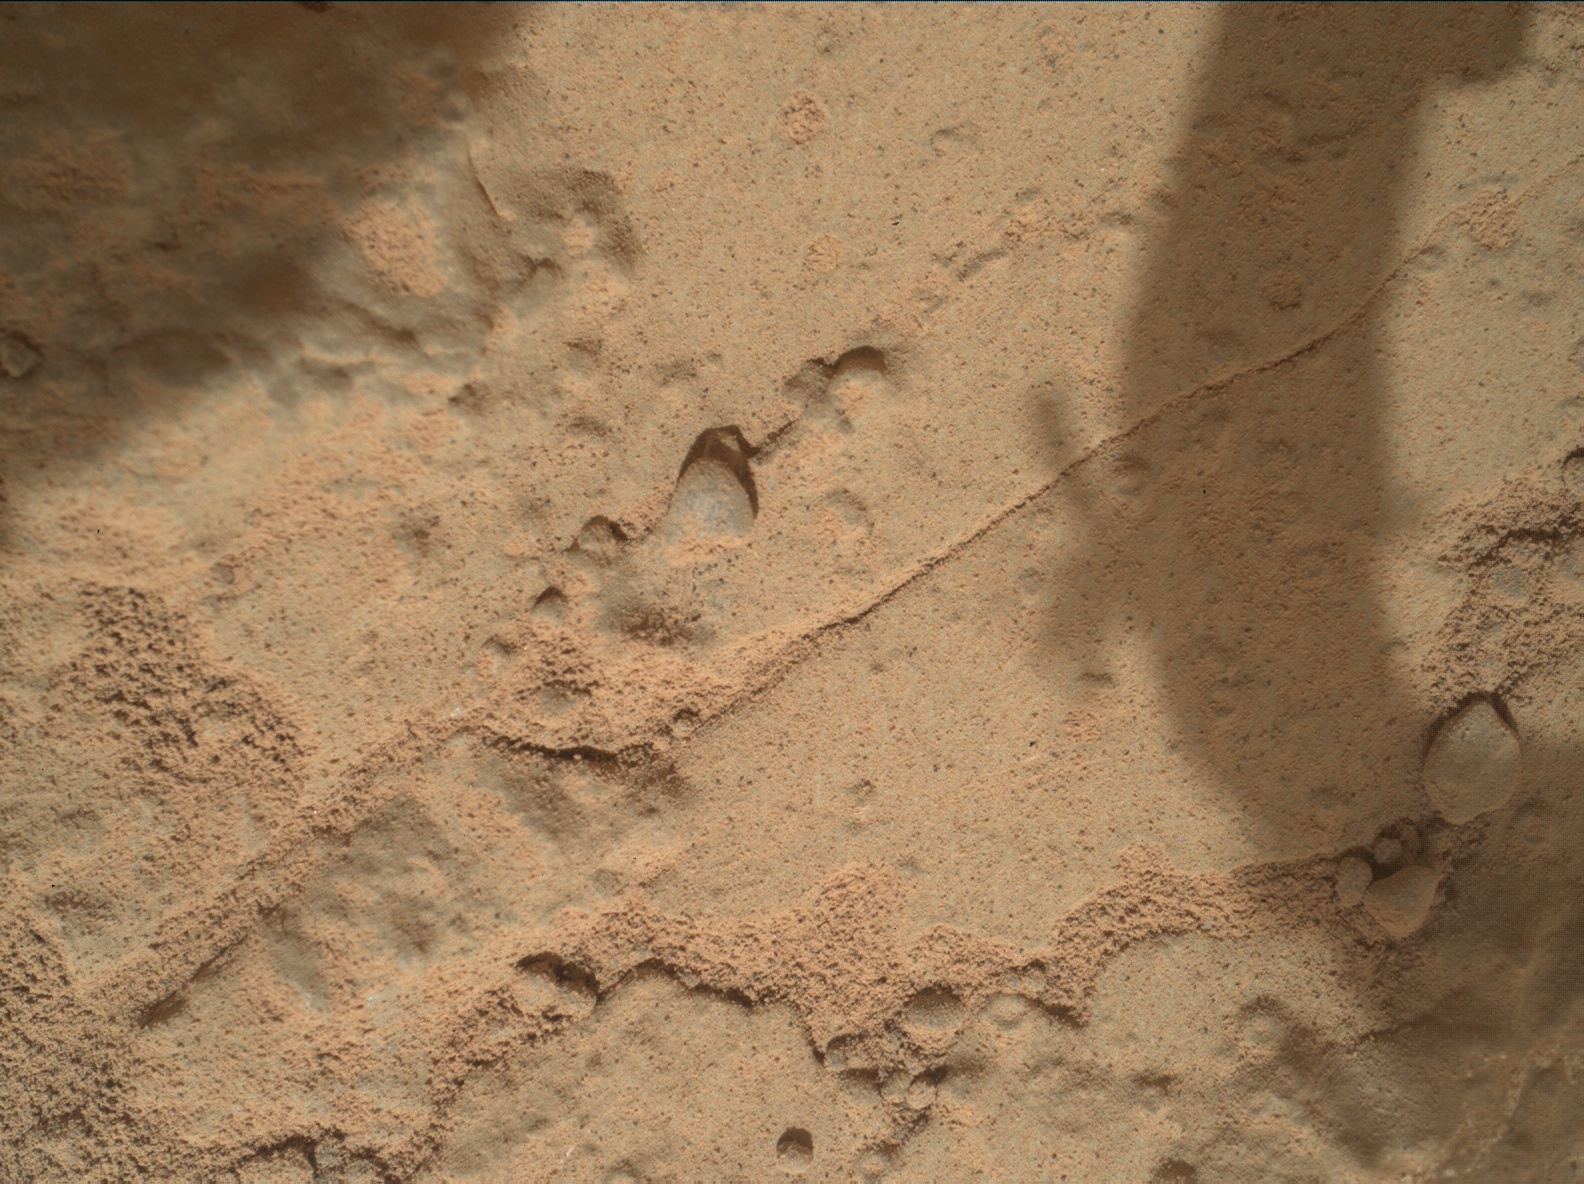 Nasa's Mars rover Curiosity acquired this image using its Mars Hand Lens Imager (MAHLI) on Sol 181